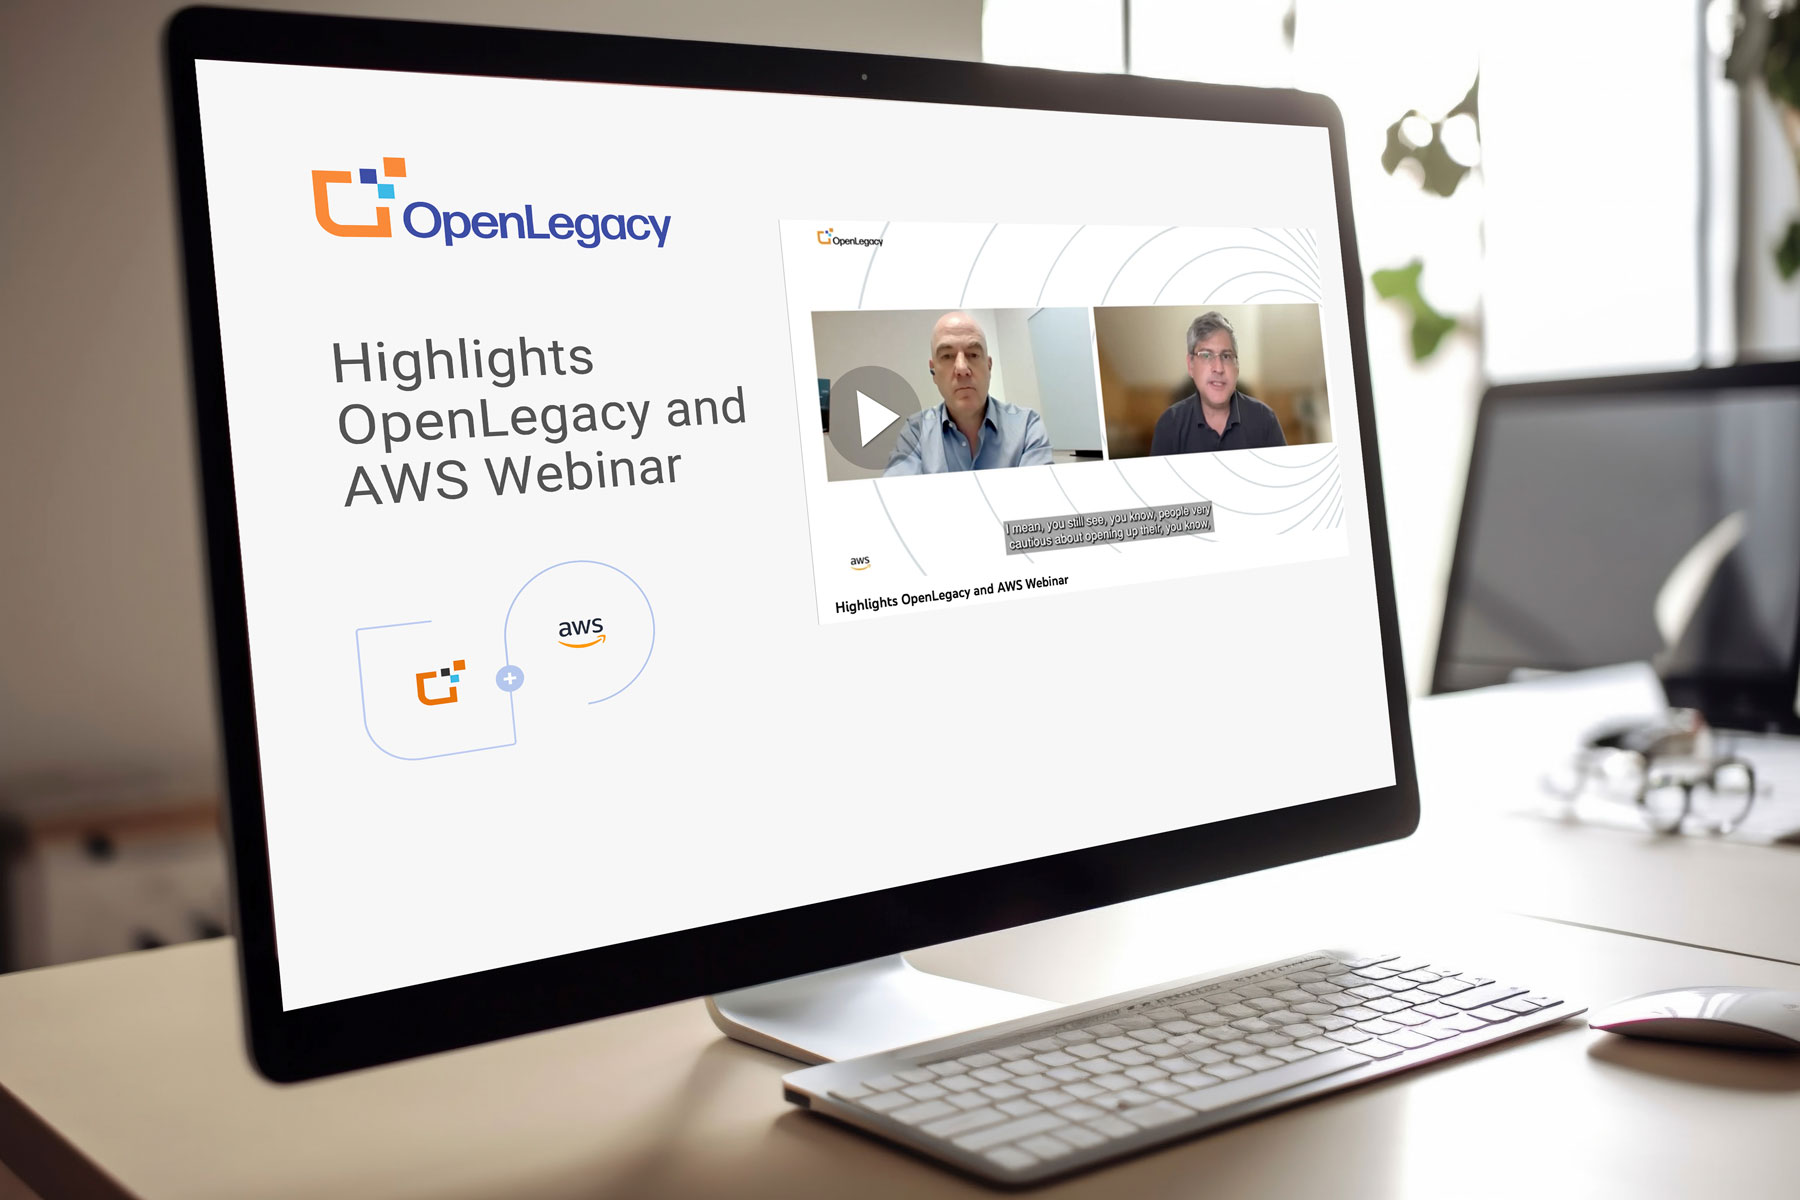 Image of AWS + Openlegacy webcast on a computer screen